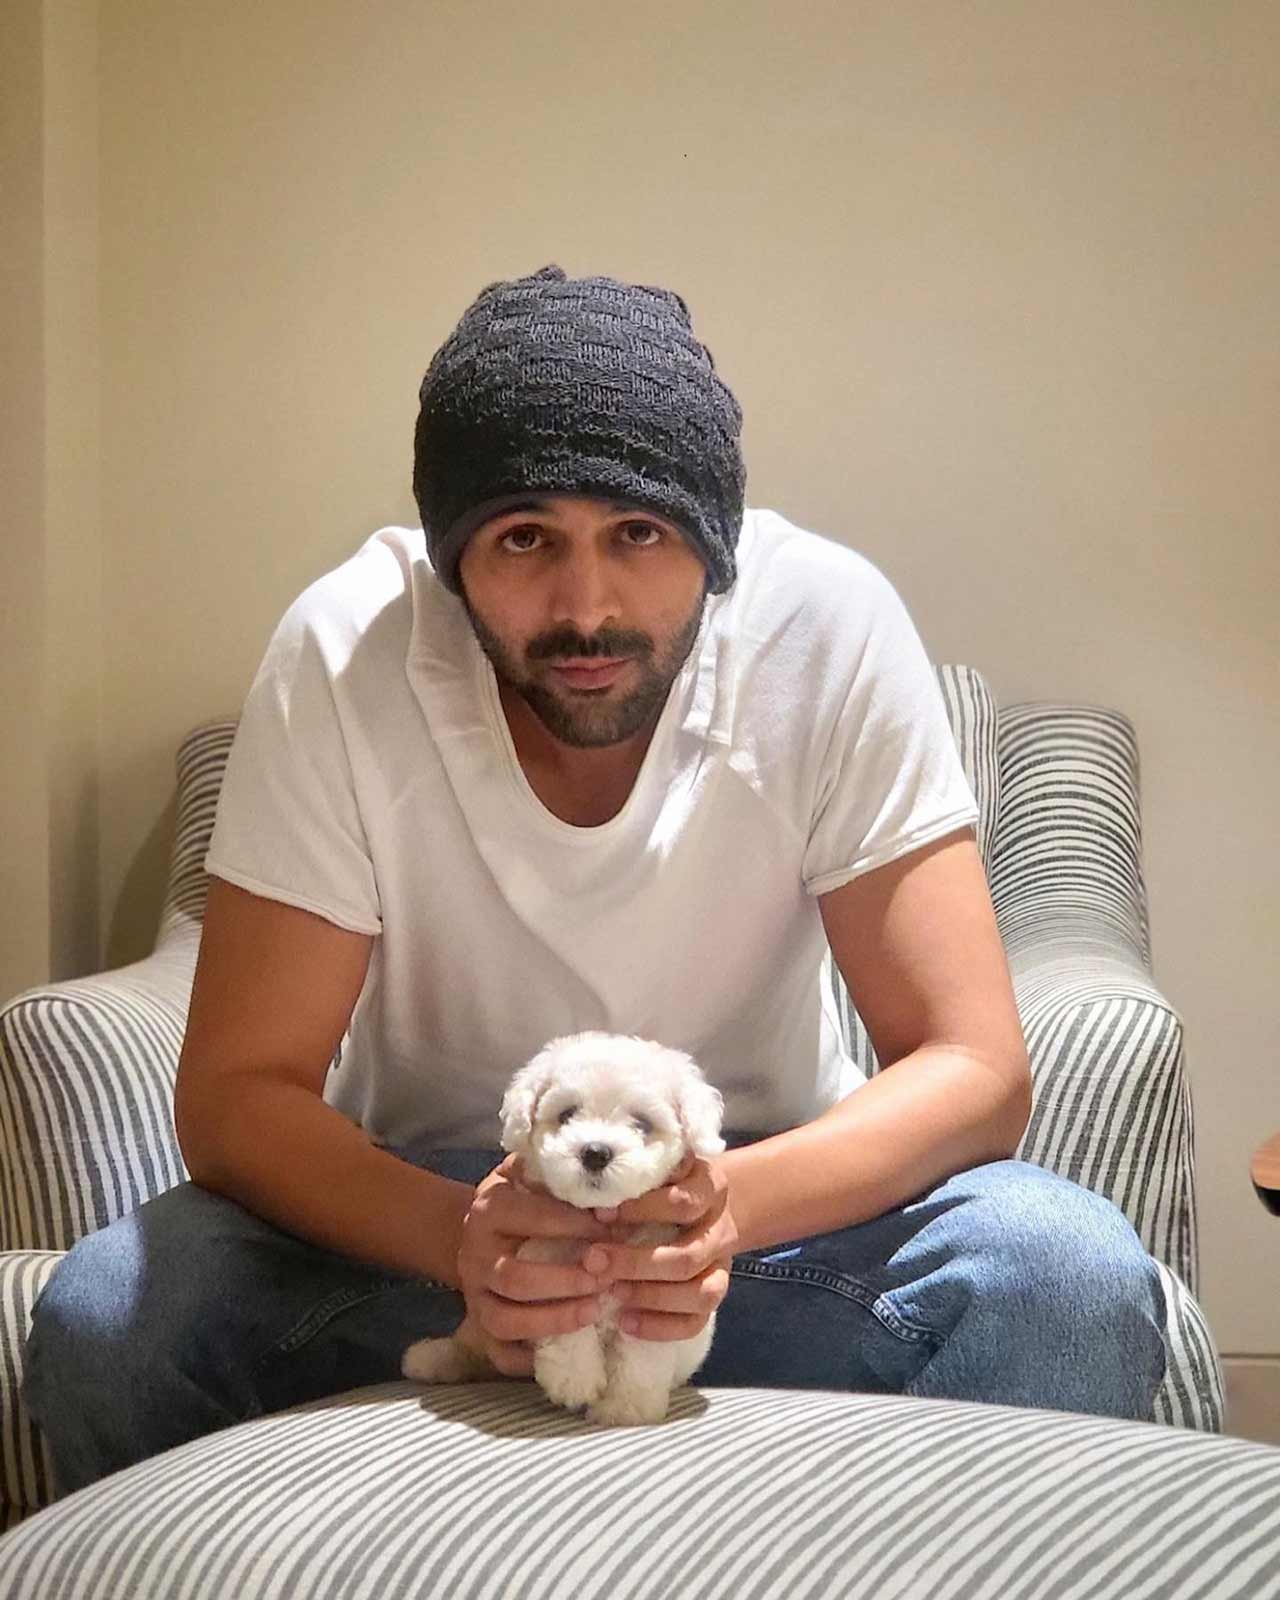 Kartik Aaryan: The Love Aaj Kal actor was named India's Hottest Vegetarian, according to votes on the official website of People for Ethical Treatment of Animals (PETA) India in 2018. Kartik said it only took one video of animals suffering and dying in the meat industry to convince him to go vegetarian. 